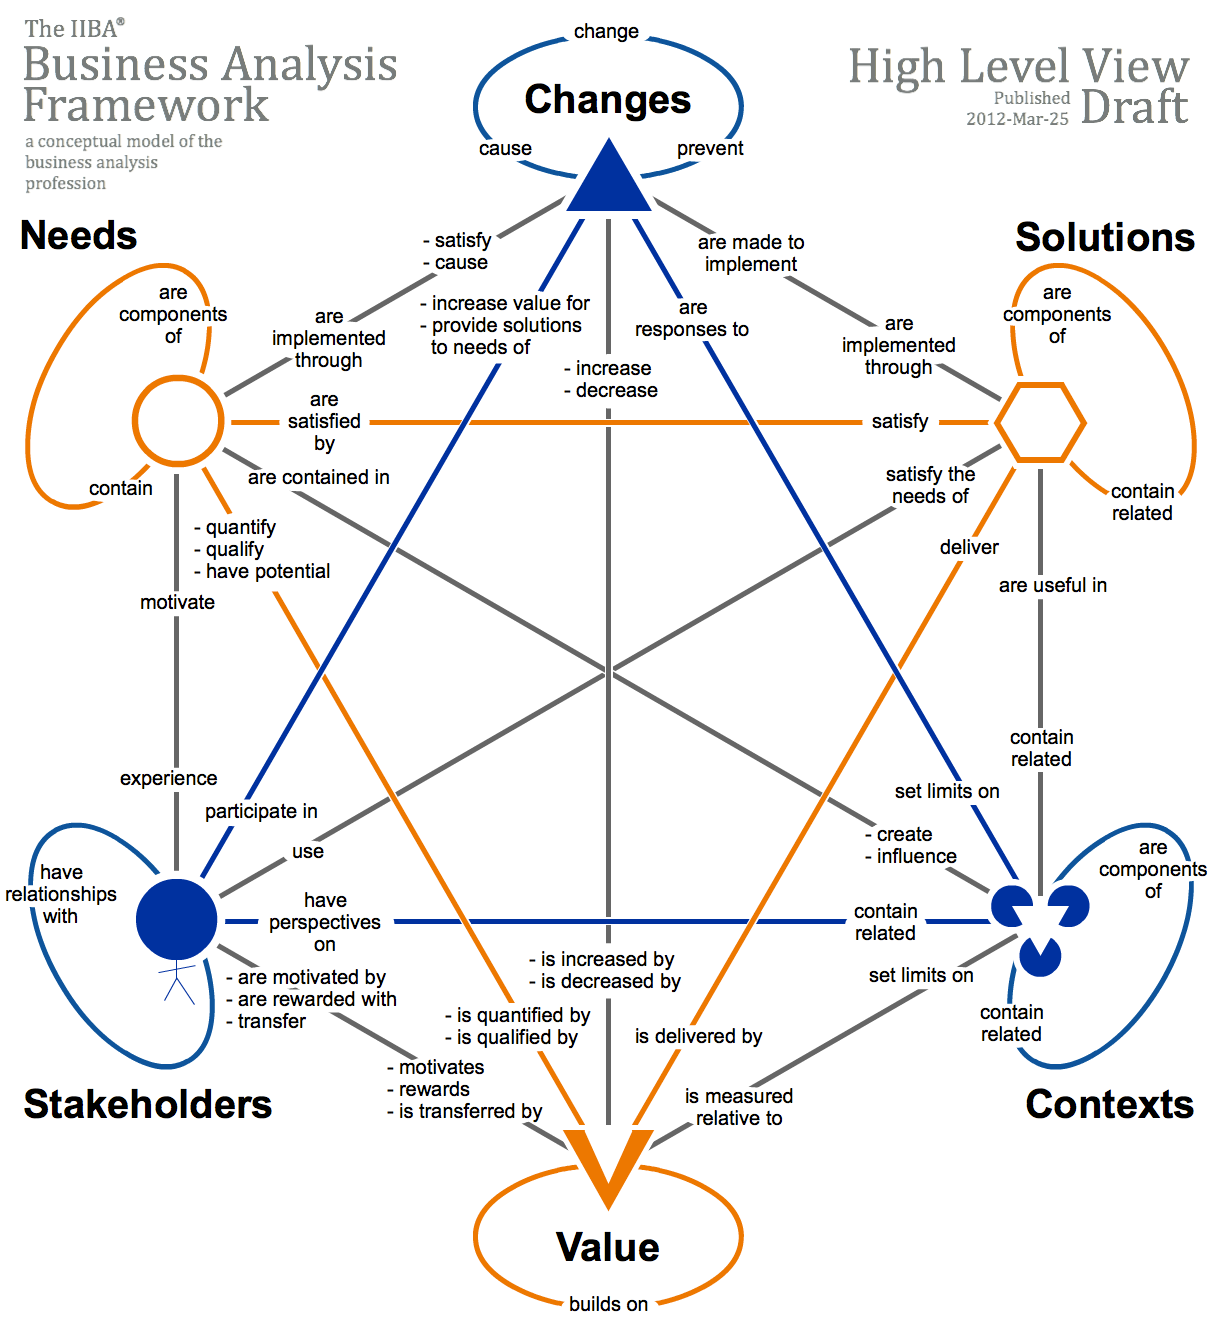 A system approach to apply the Business Analysis Framework Core Concepts